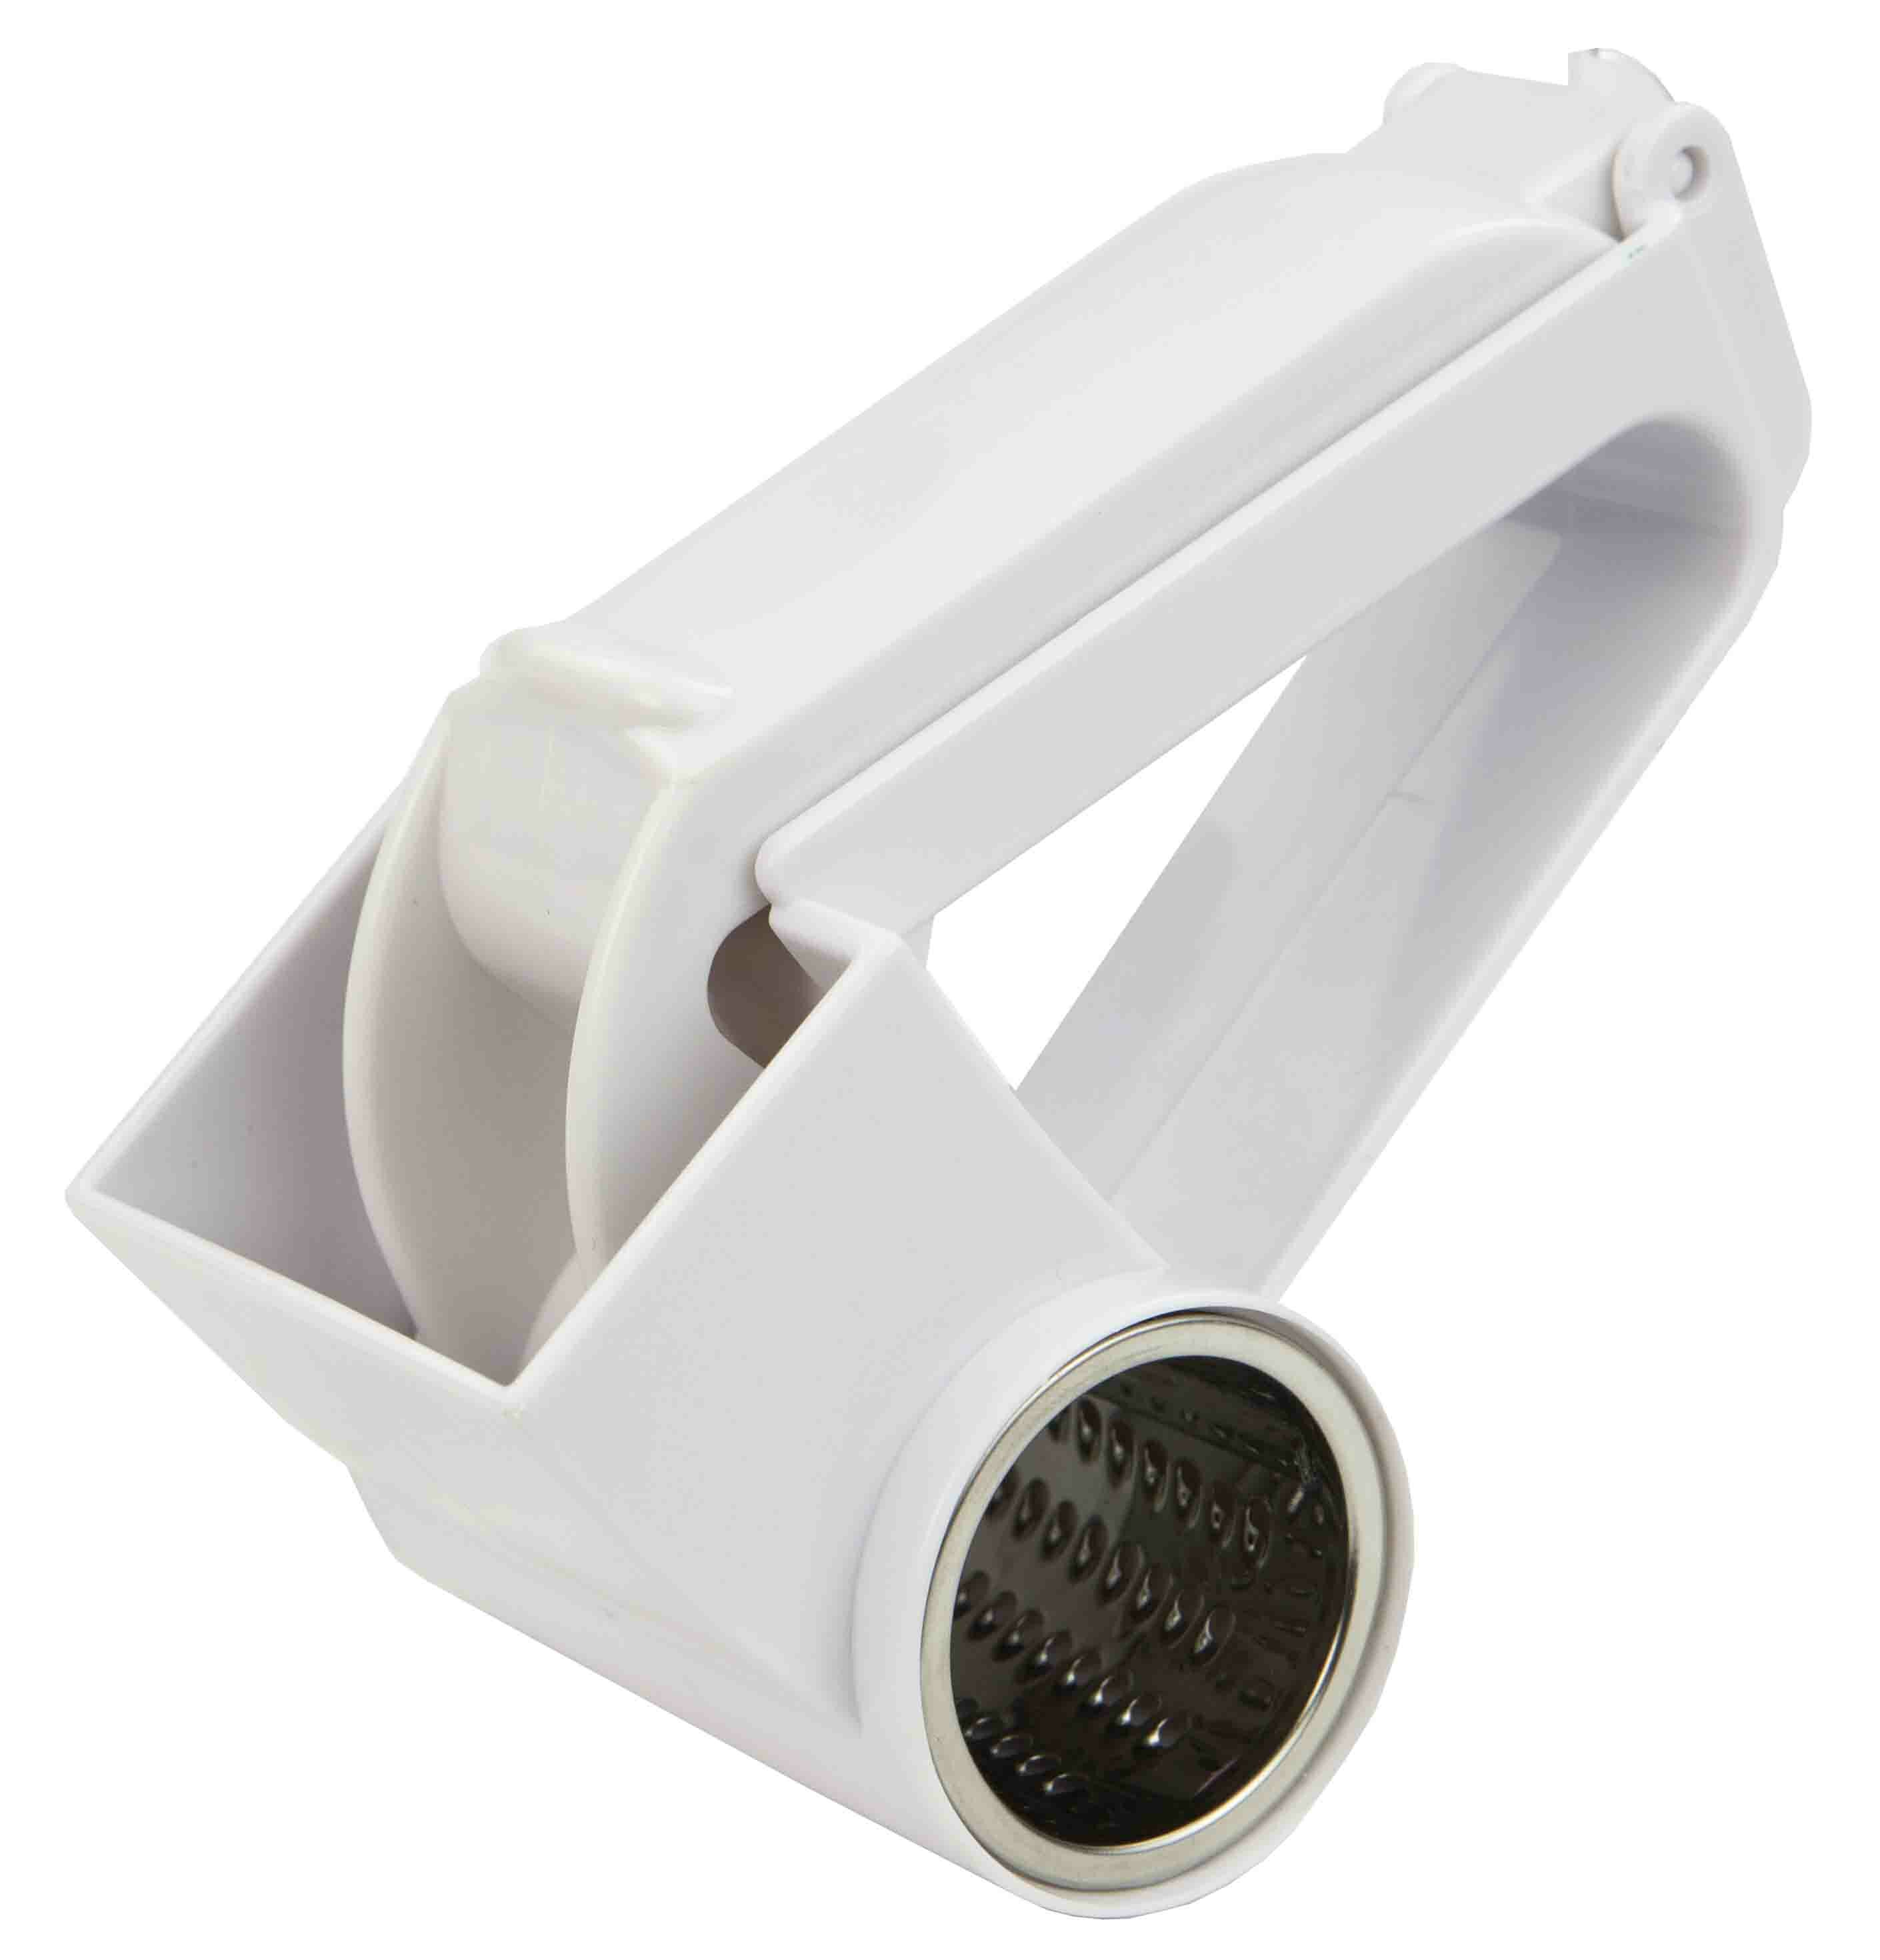 Zyliss Classic Restaurant Rotary Cheese Grater